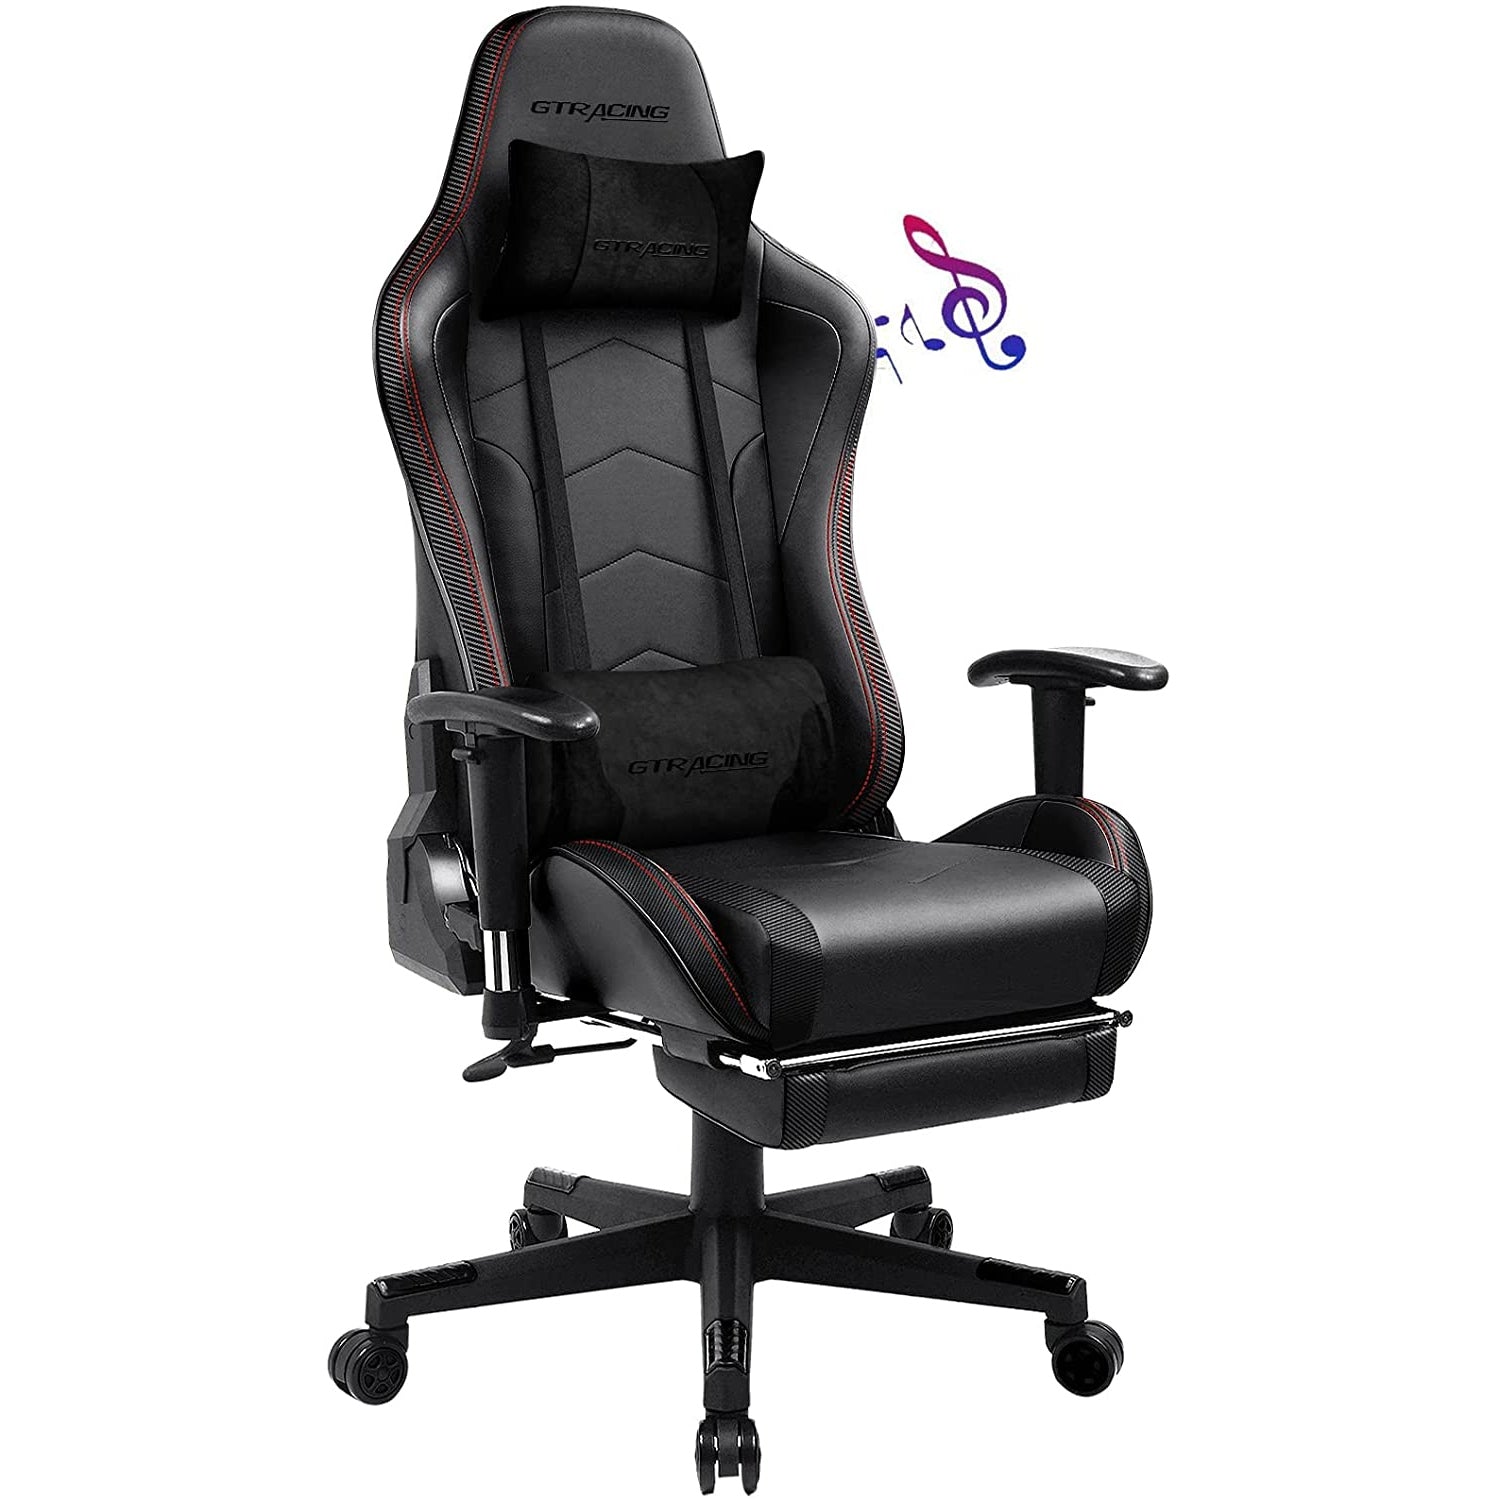 GT890MF-RED Gaming Chair with Speaker | GTRACING – GTRACING（ジー 